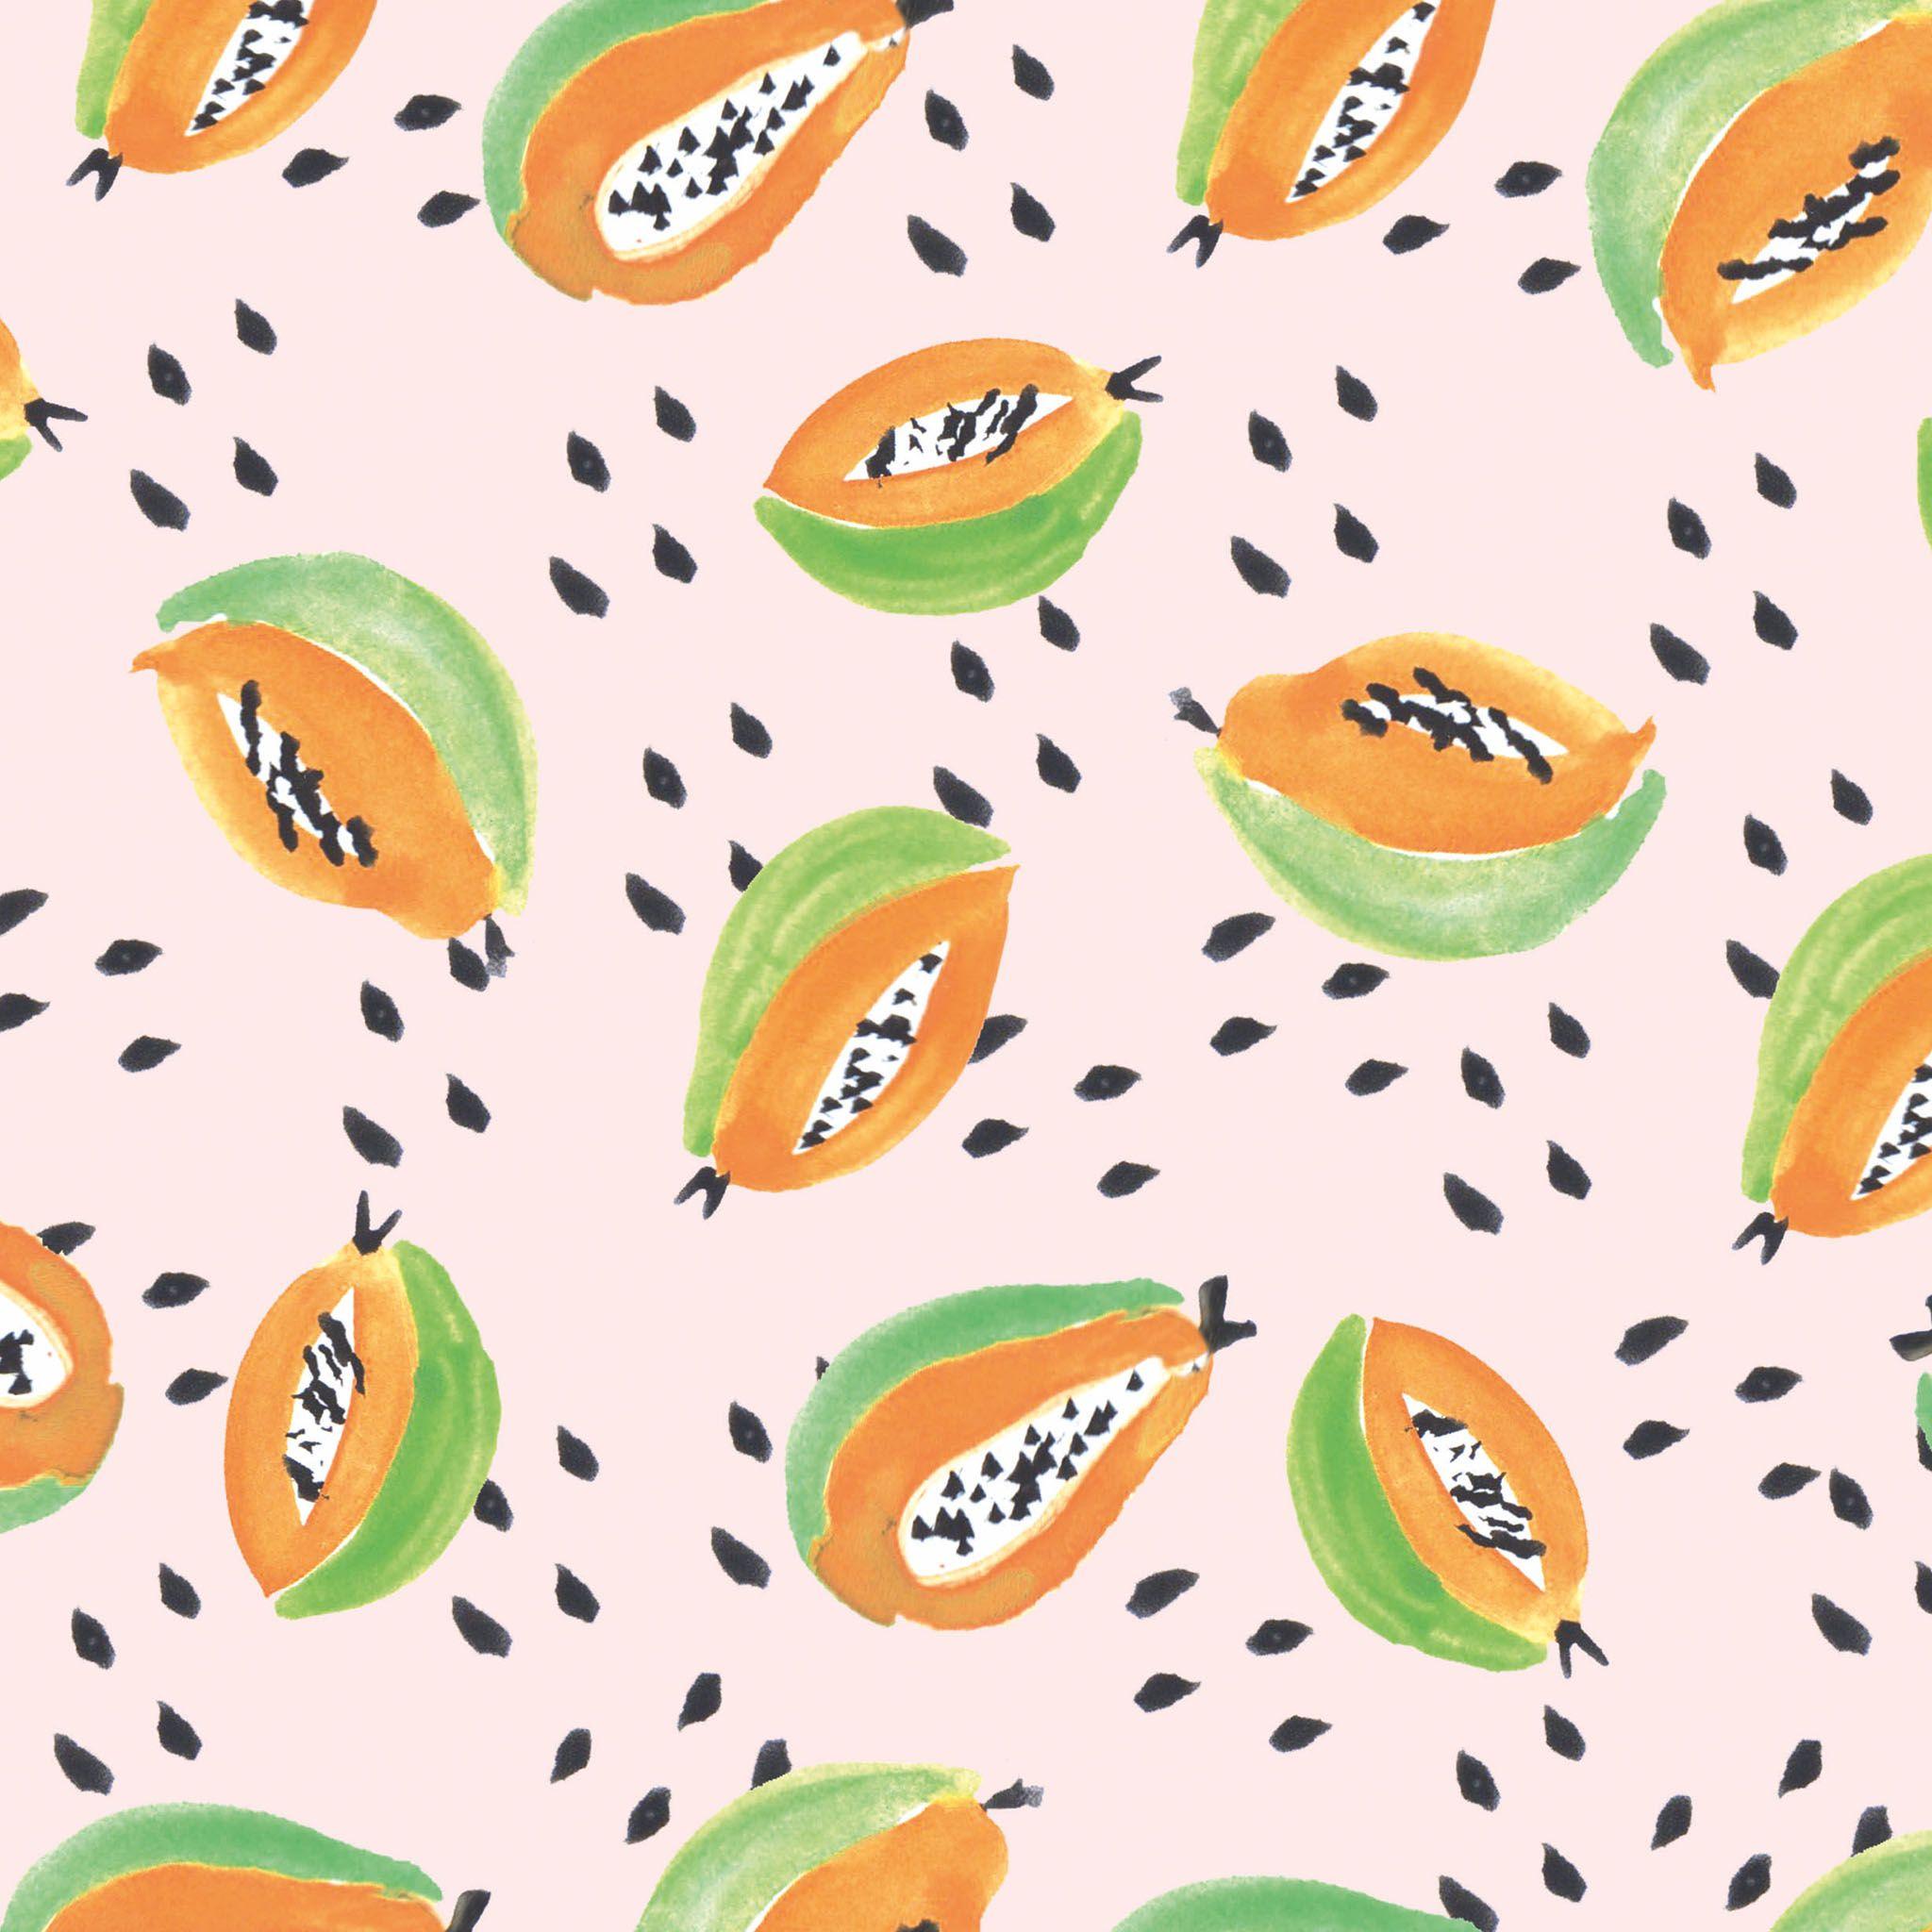 Download free illustrated papaya wallpaper for your phone, computer